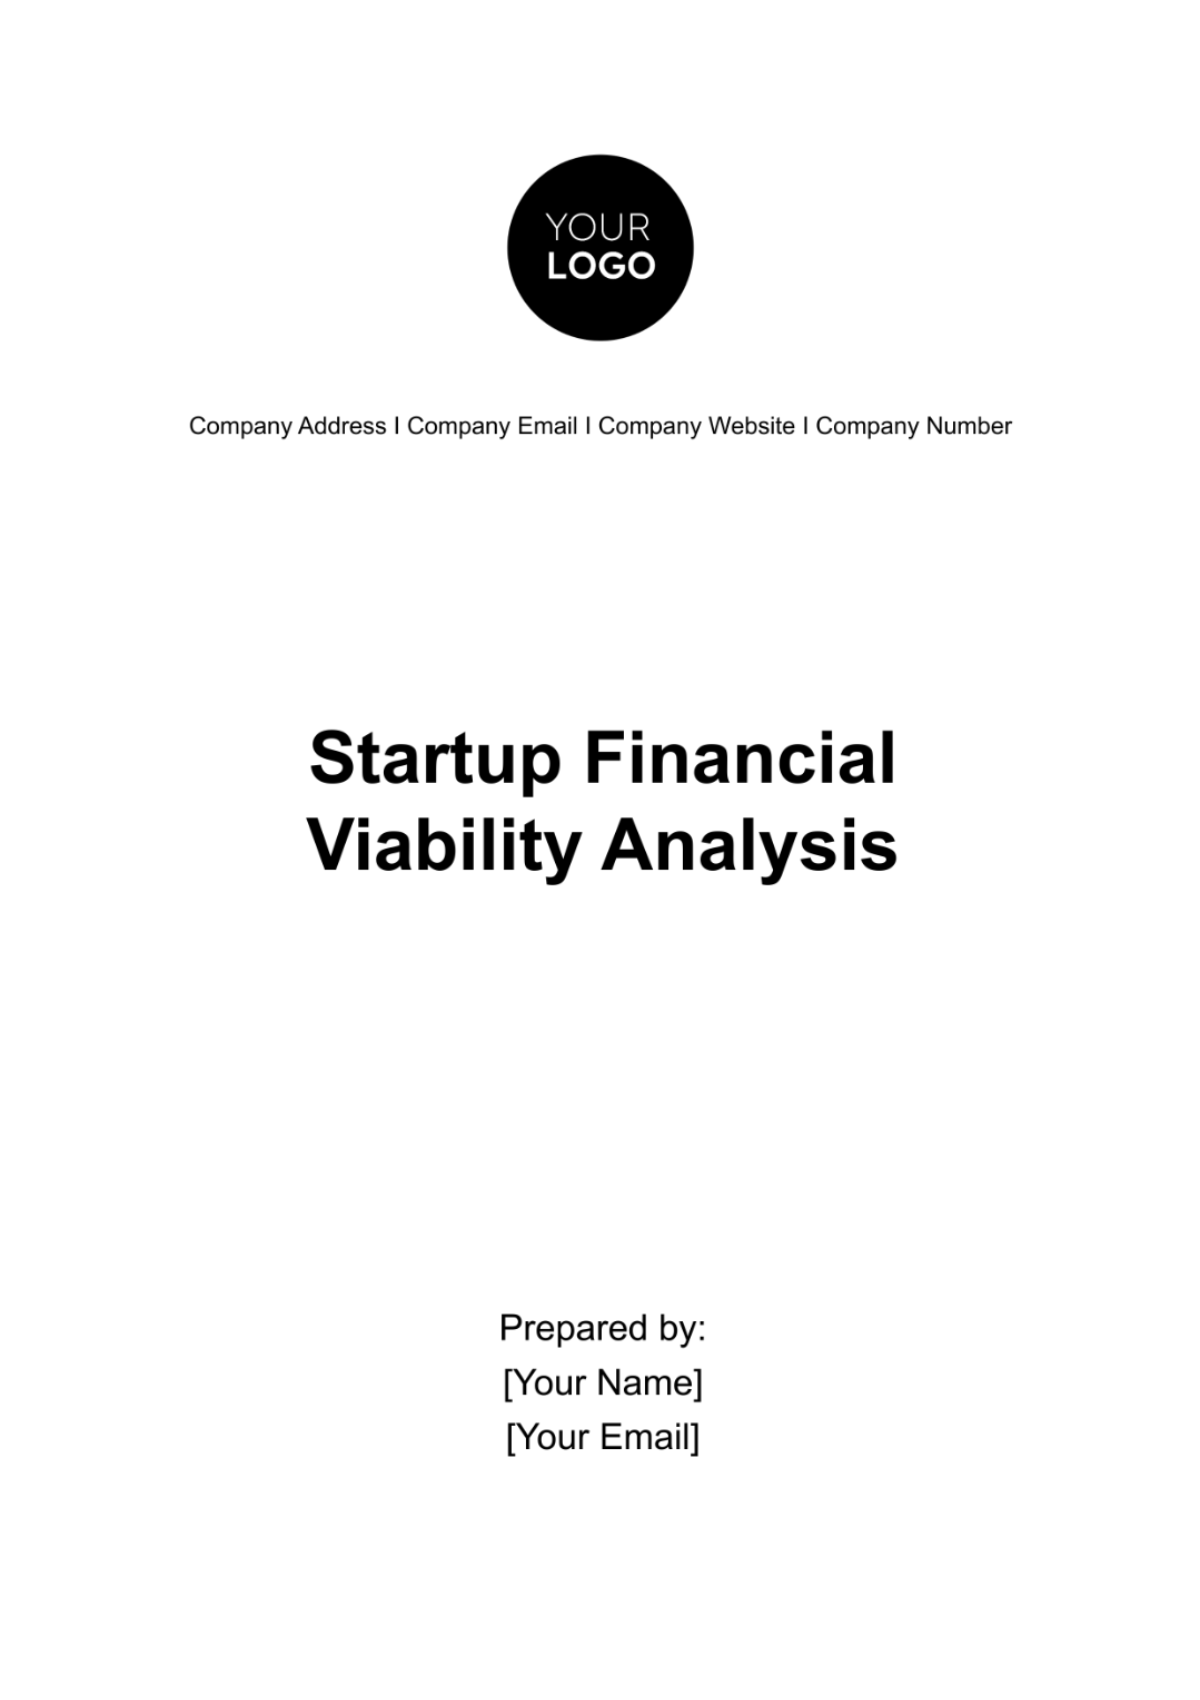 Startup Financial Viability Analysis Template